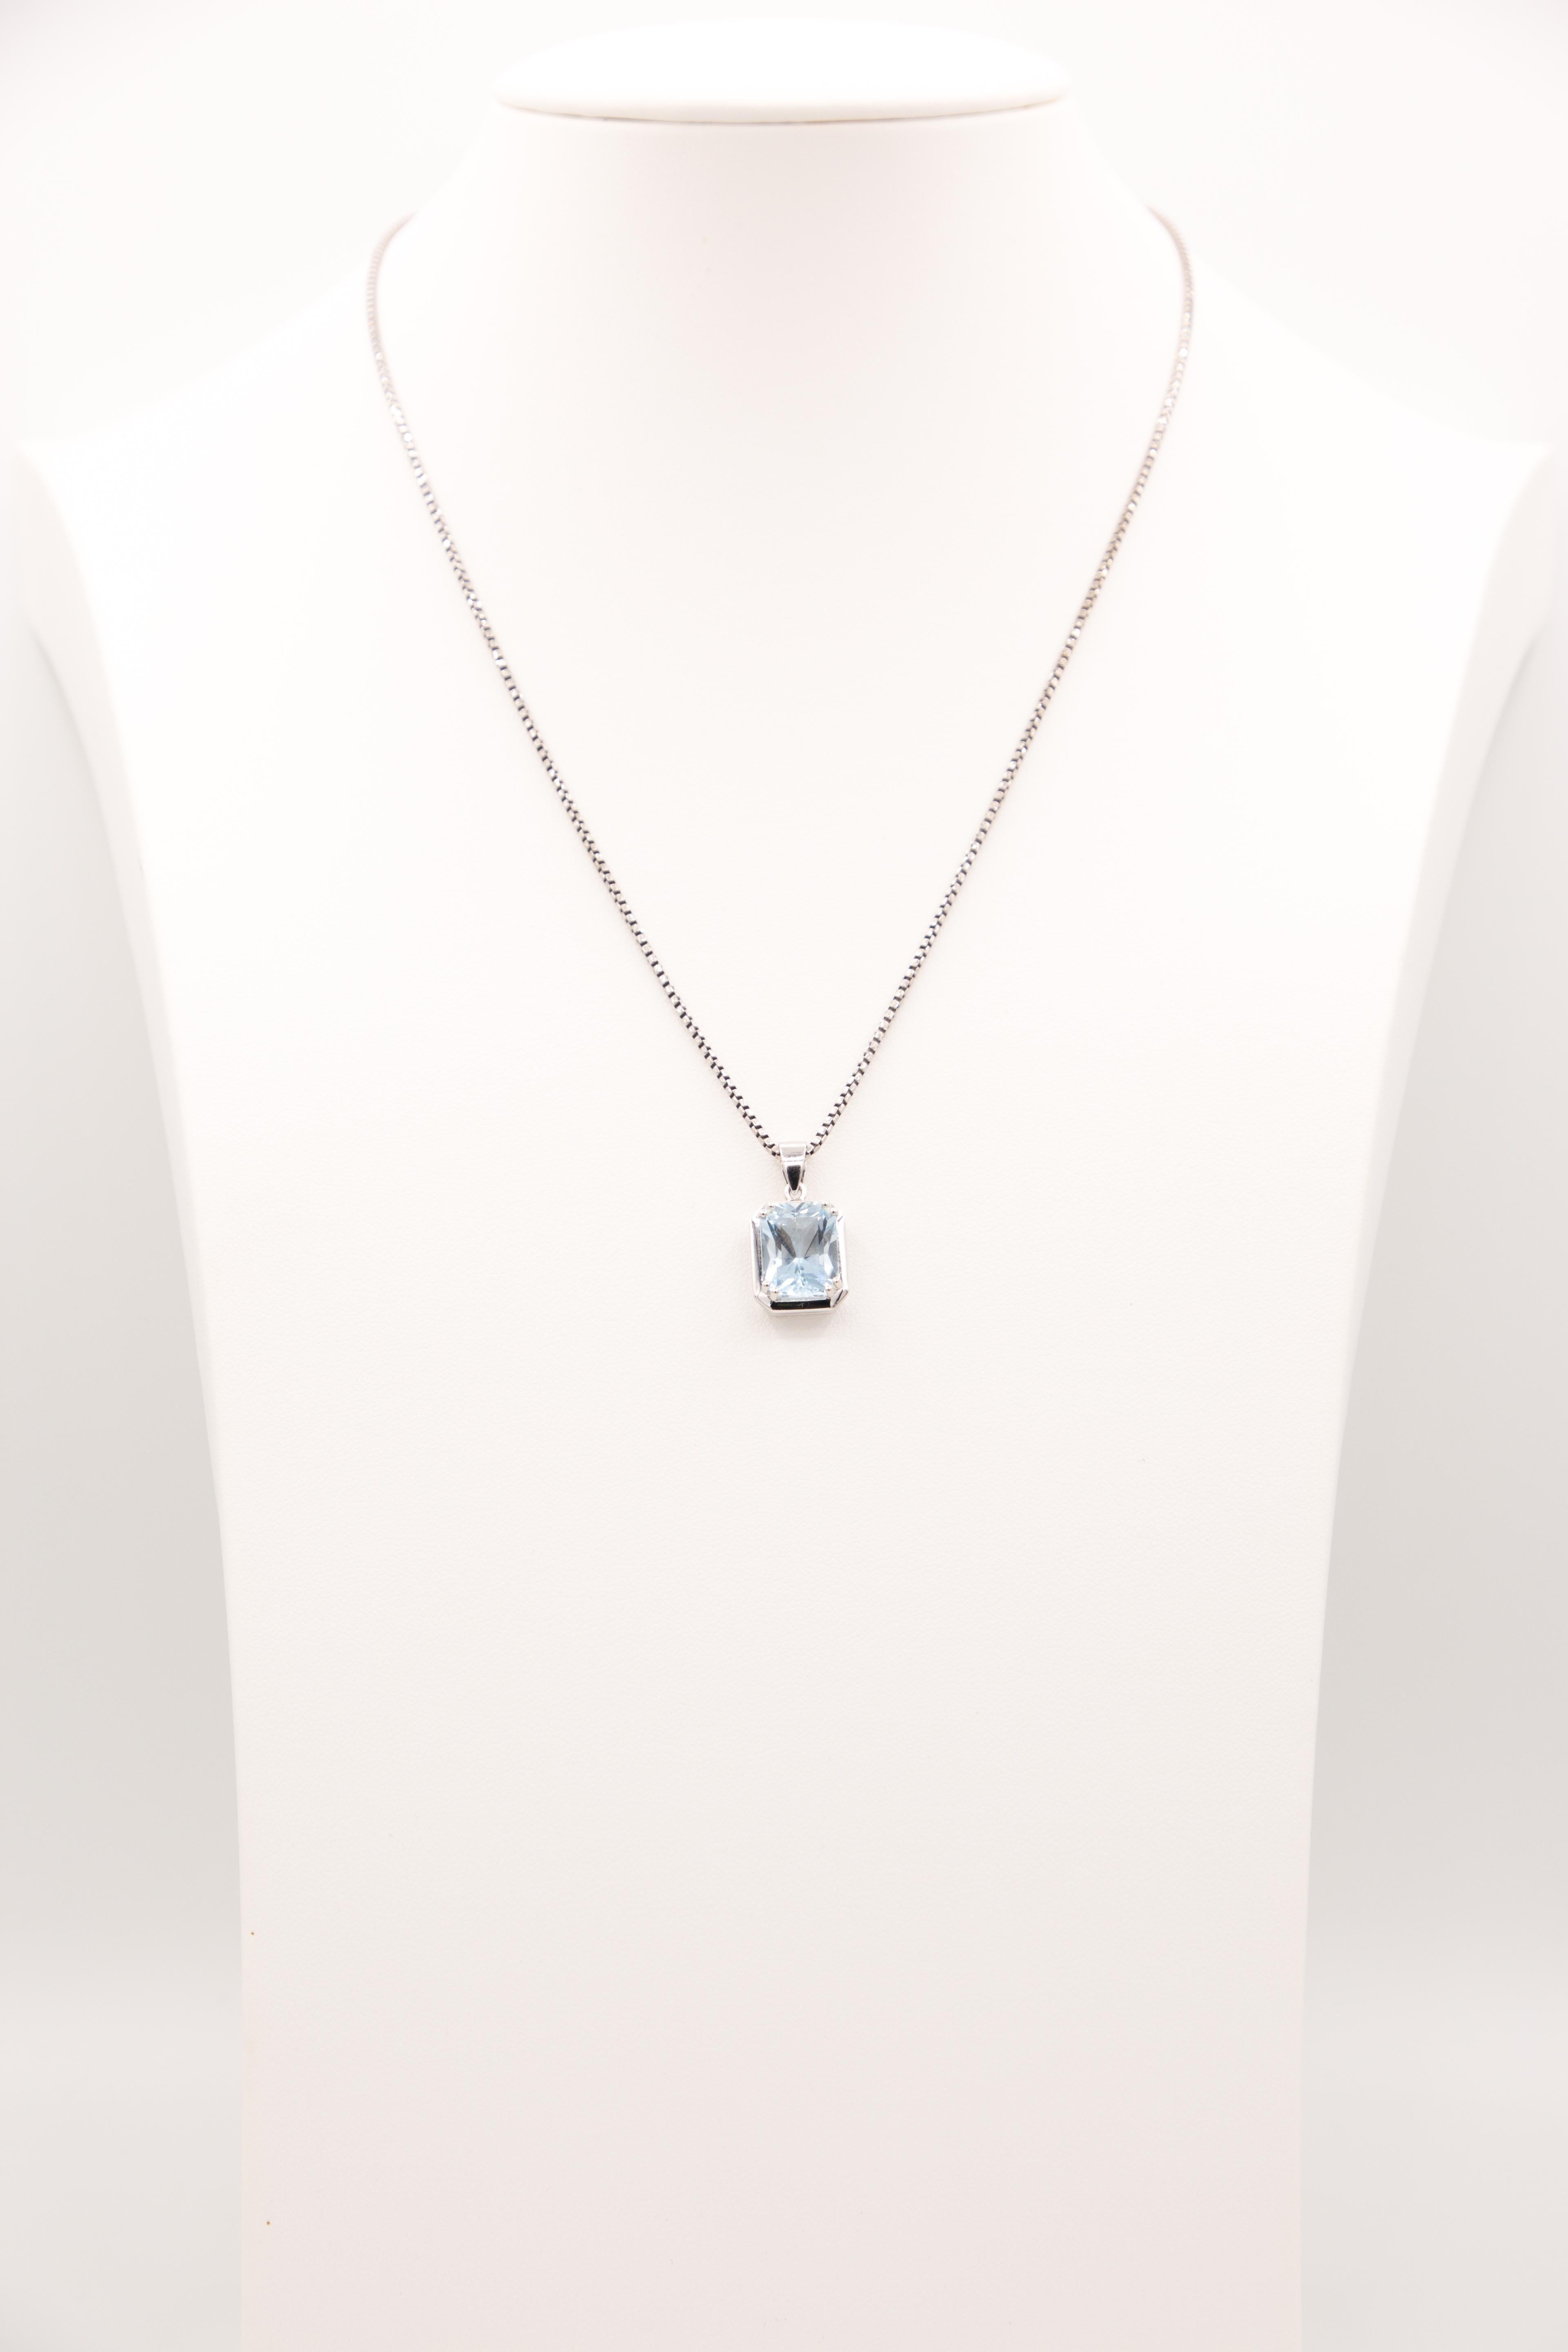 This pendant is made in 18 k white gold 
23 x 12 mm size
deep 10 mm
weight 5,33 gram
5,92 ct beautiful blue aquamarin
aquamarin is 11 x 13 mm and has 5,92 ct

Very nice to blue eyes and a piece of jewellery
you can wear every day